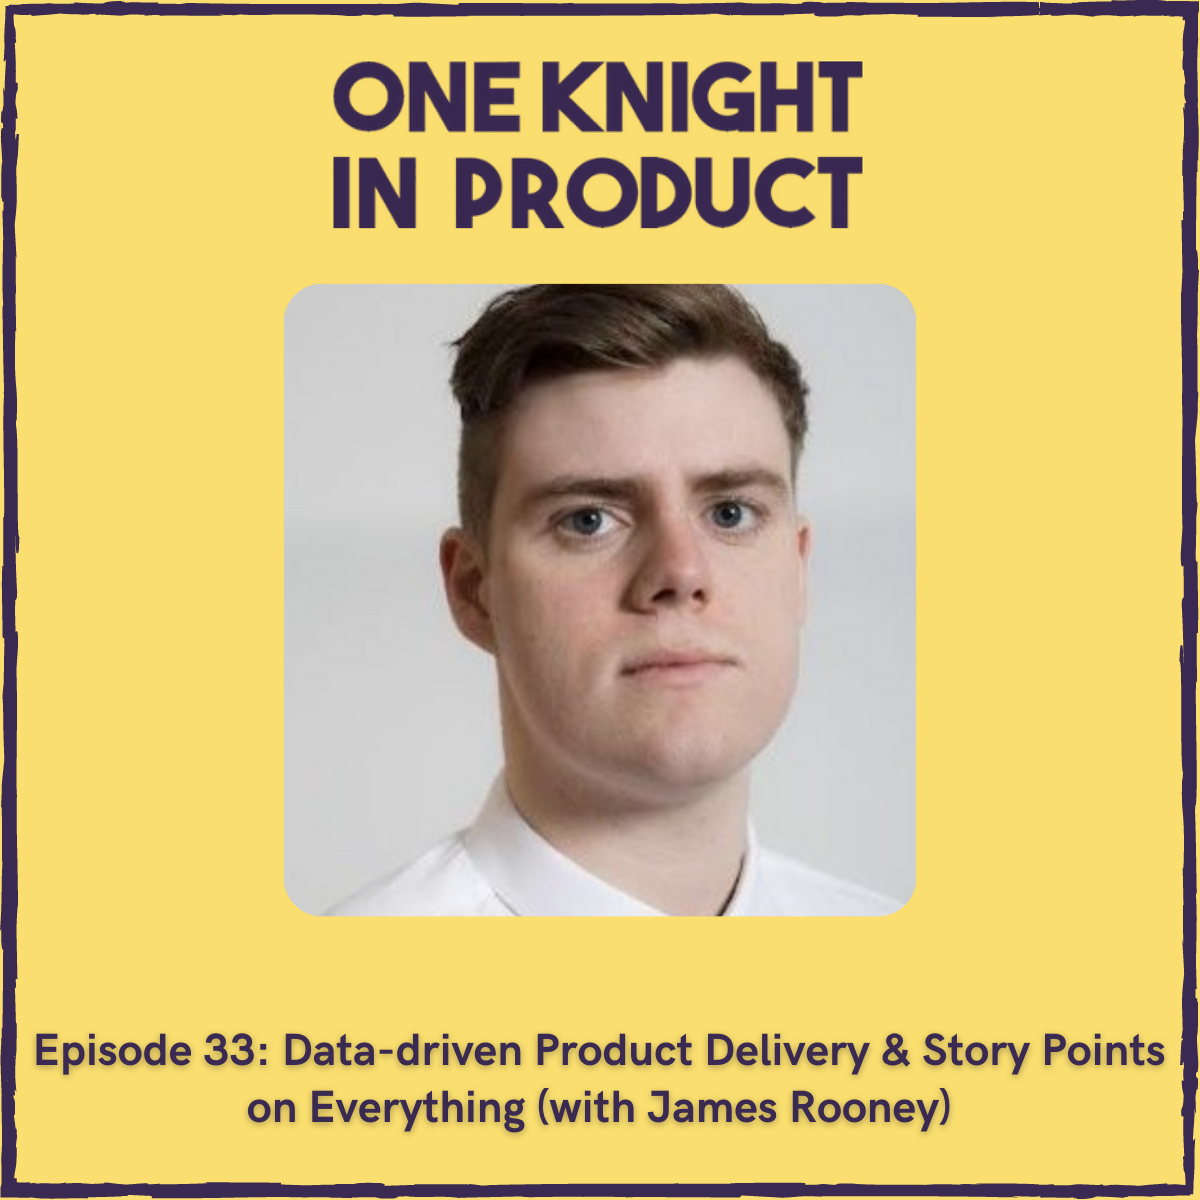 Data-driven Product Delivery & Story Points on Everything (with James Rooney, Delivery Manager @ Discovery Inc.)